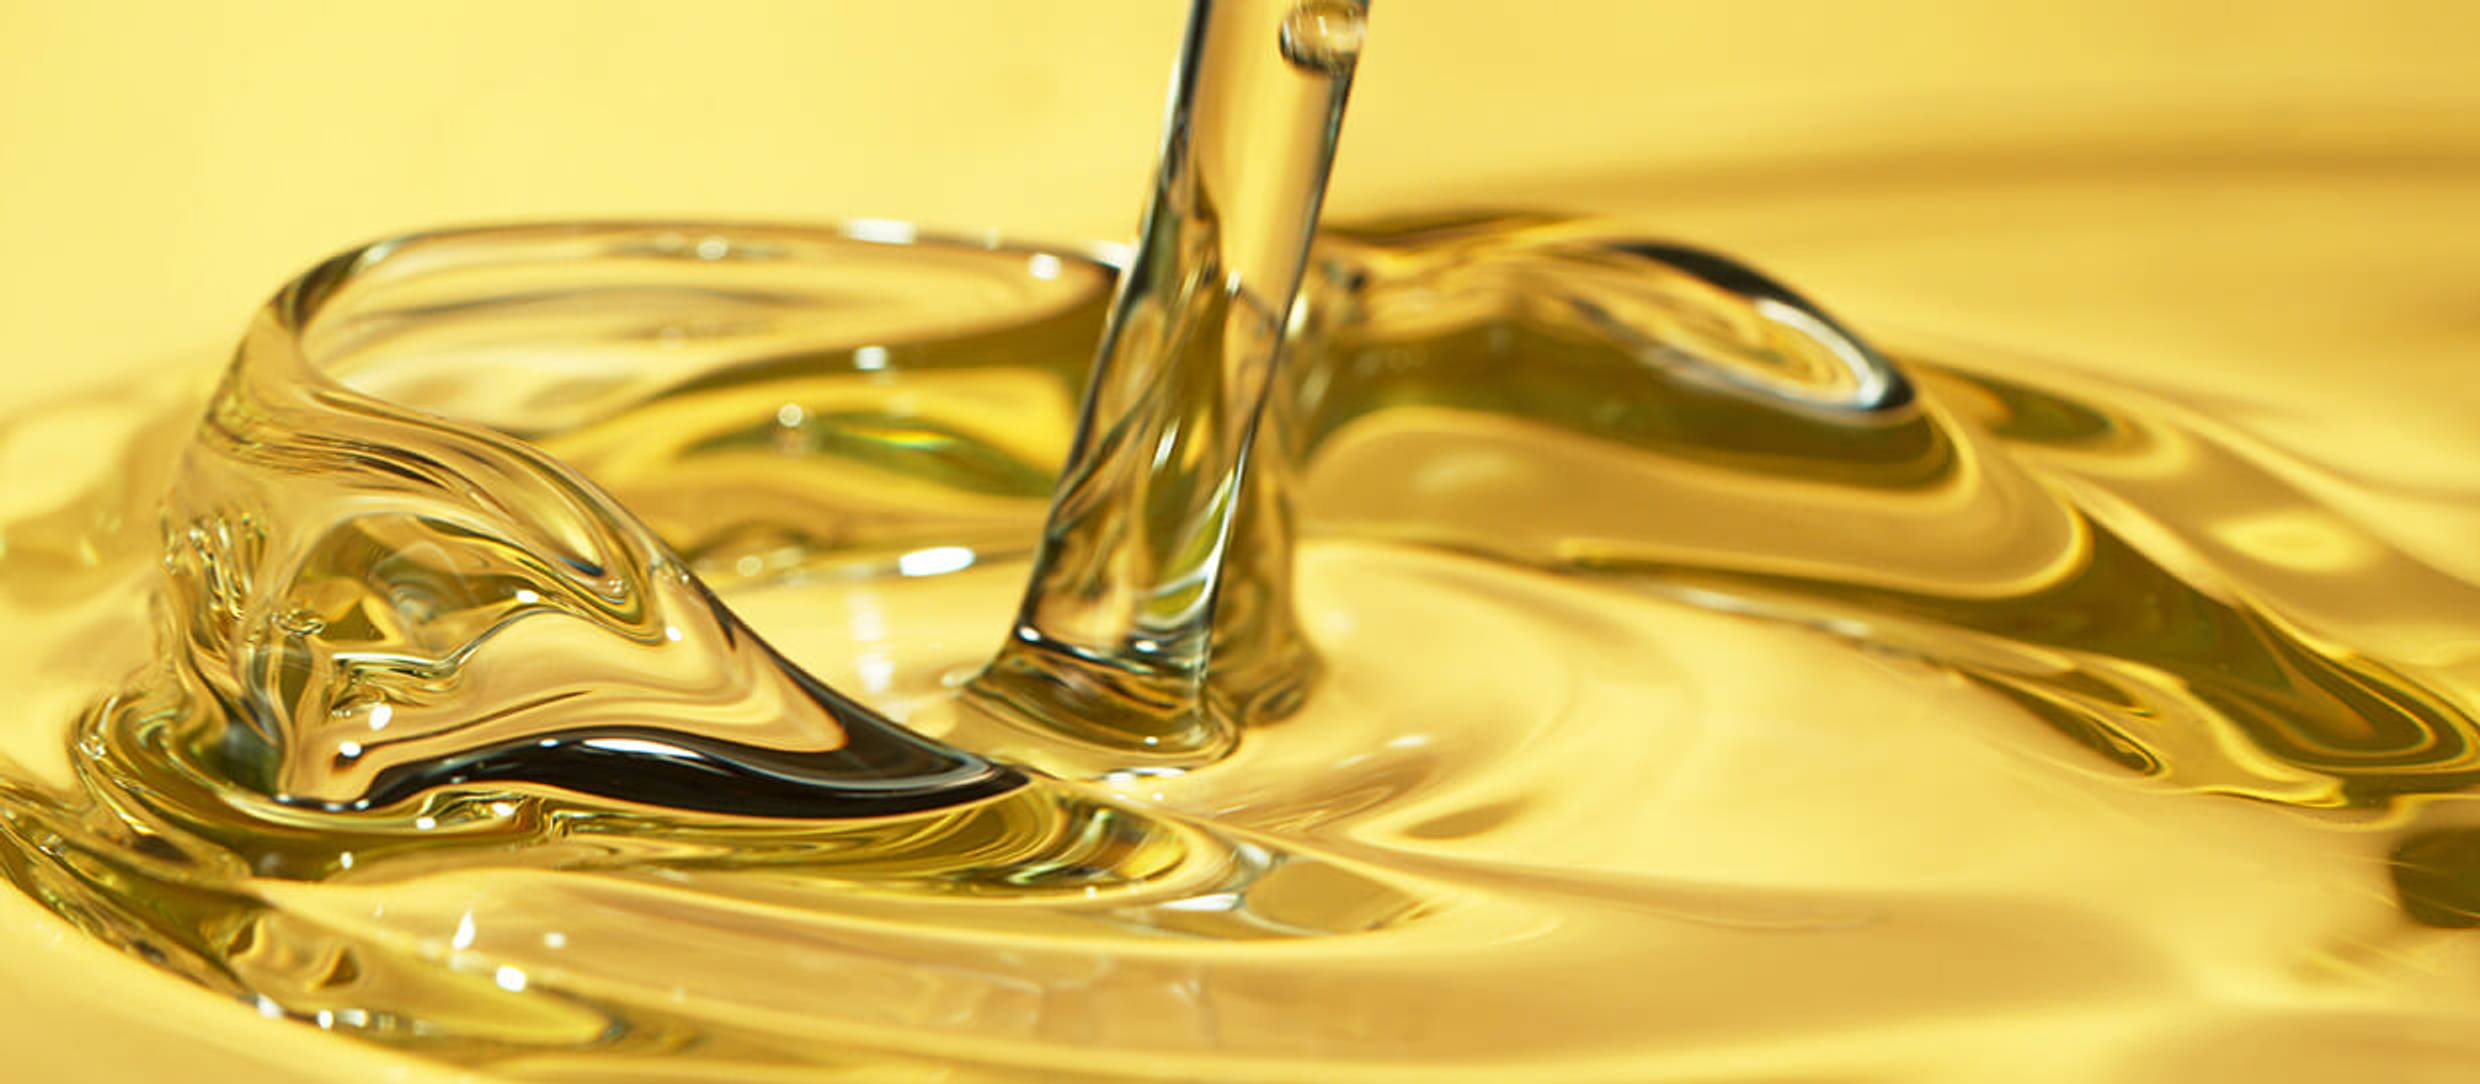 Benefits of Using Sunflower Oil in your massage treatment program